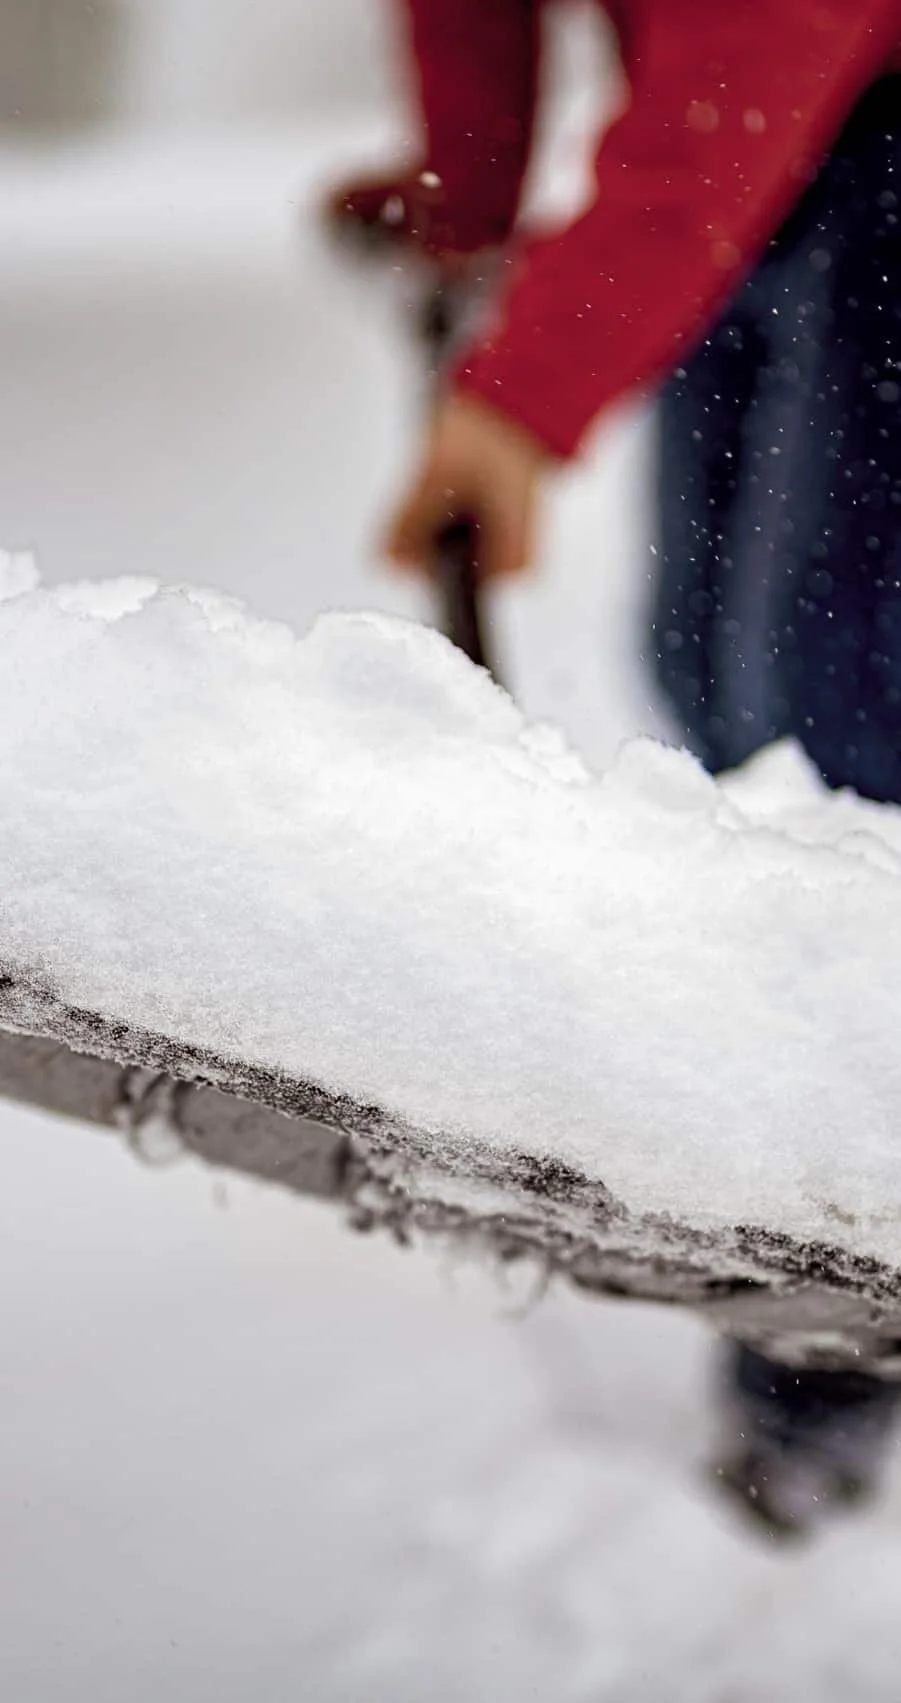 Closeup shot of snow on a snow shovel with a blurred background